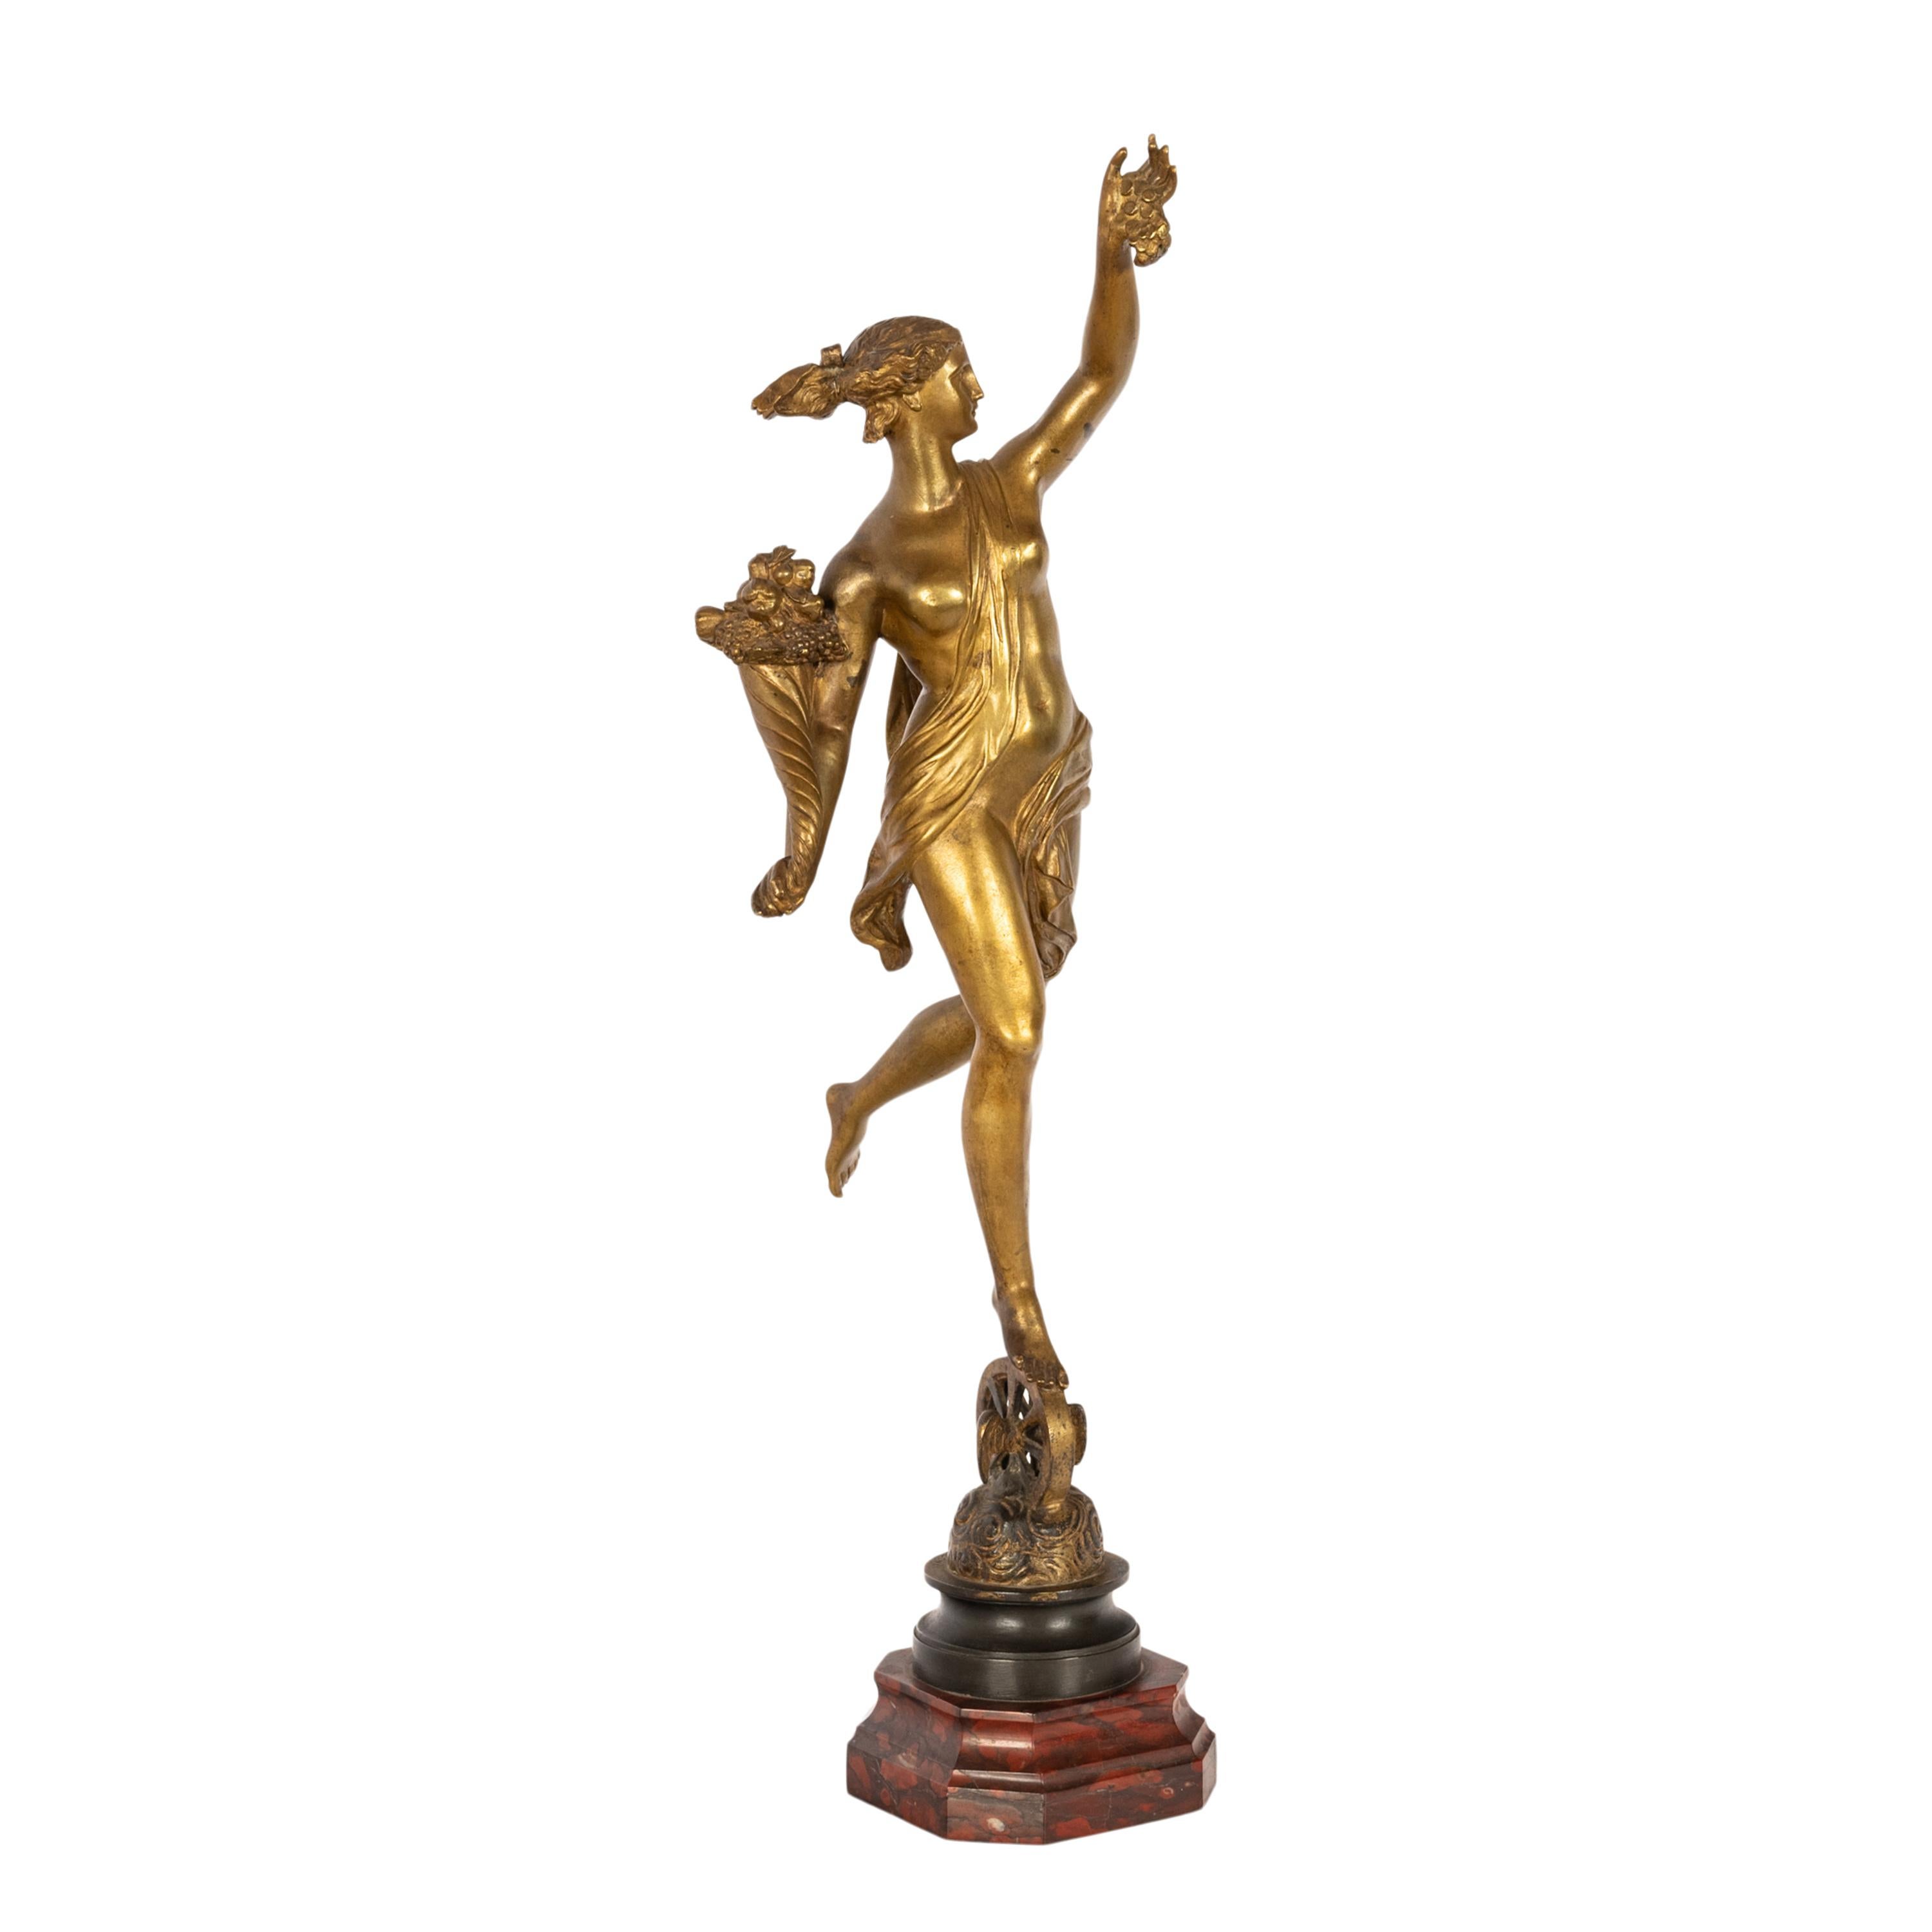 A very good large antique French gilt bronze of the Roman goddess Fortuna, by Louis Guillaume Fulconis (1818-1873), circa 1860.
The bronze is inspired by sculpture of the Italian Renaissance sculptor Giambologna (1529-1608). The bronze is finely